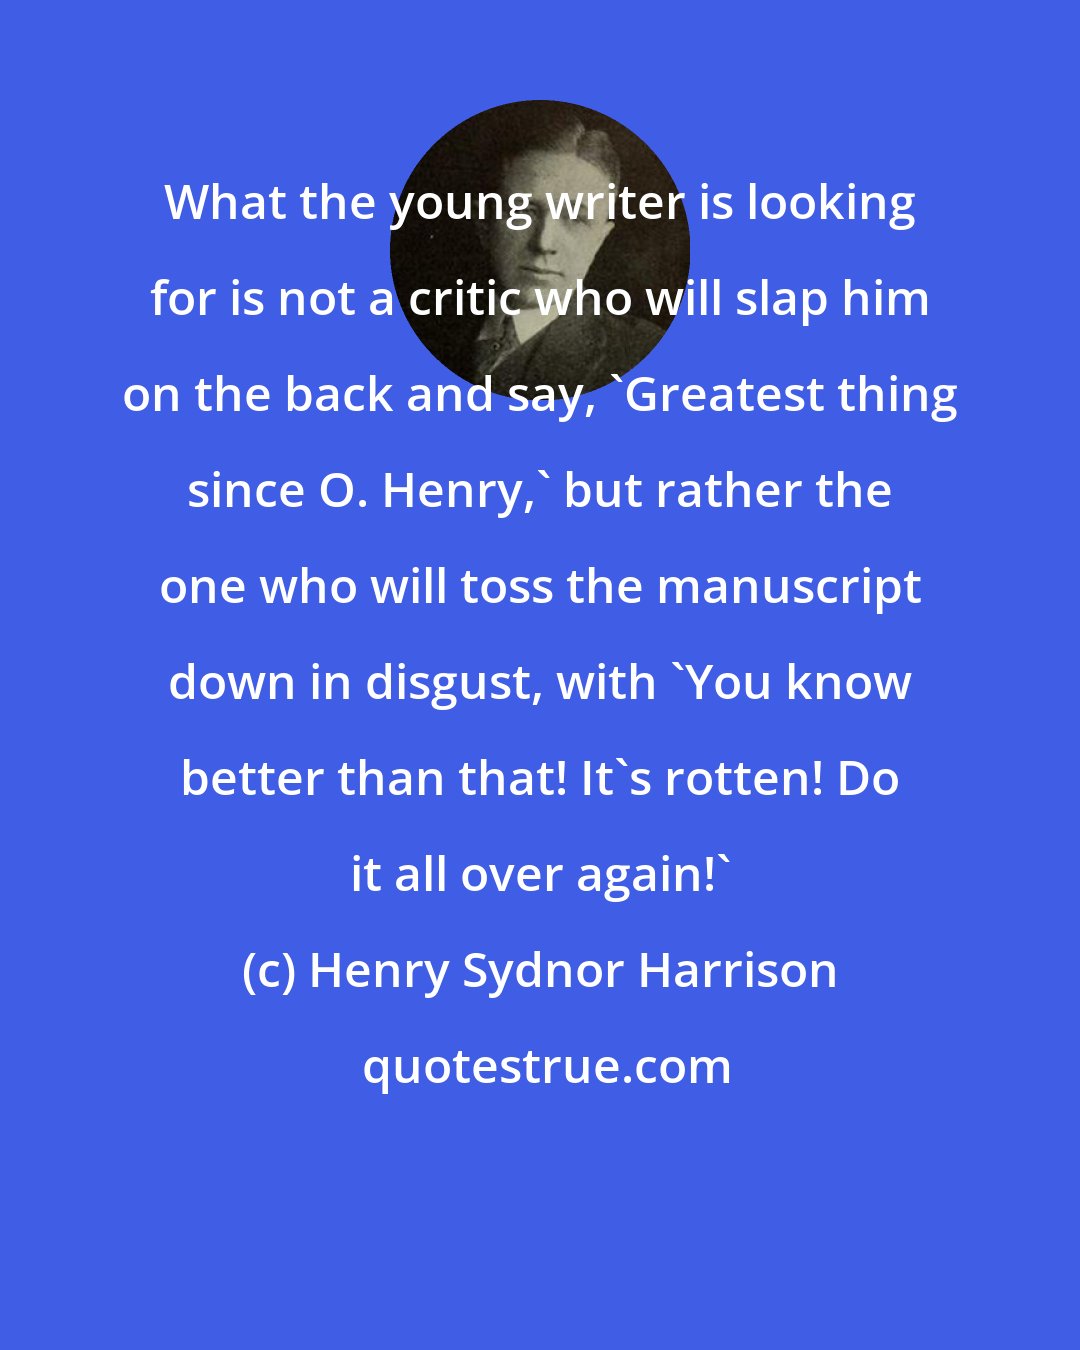 Henry Sydnor Harrison: What the young writer is looking for is not a critic who will slap him on the back and say, 'Greatest thing since O. Henry,' but rather the one who will toss the manuscript down in disgust, with 'You know better than that! It's rotten! Do it all over again!'